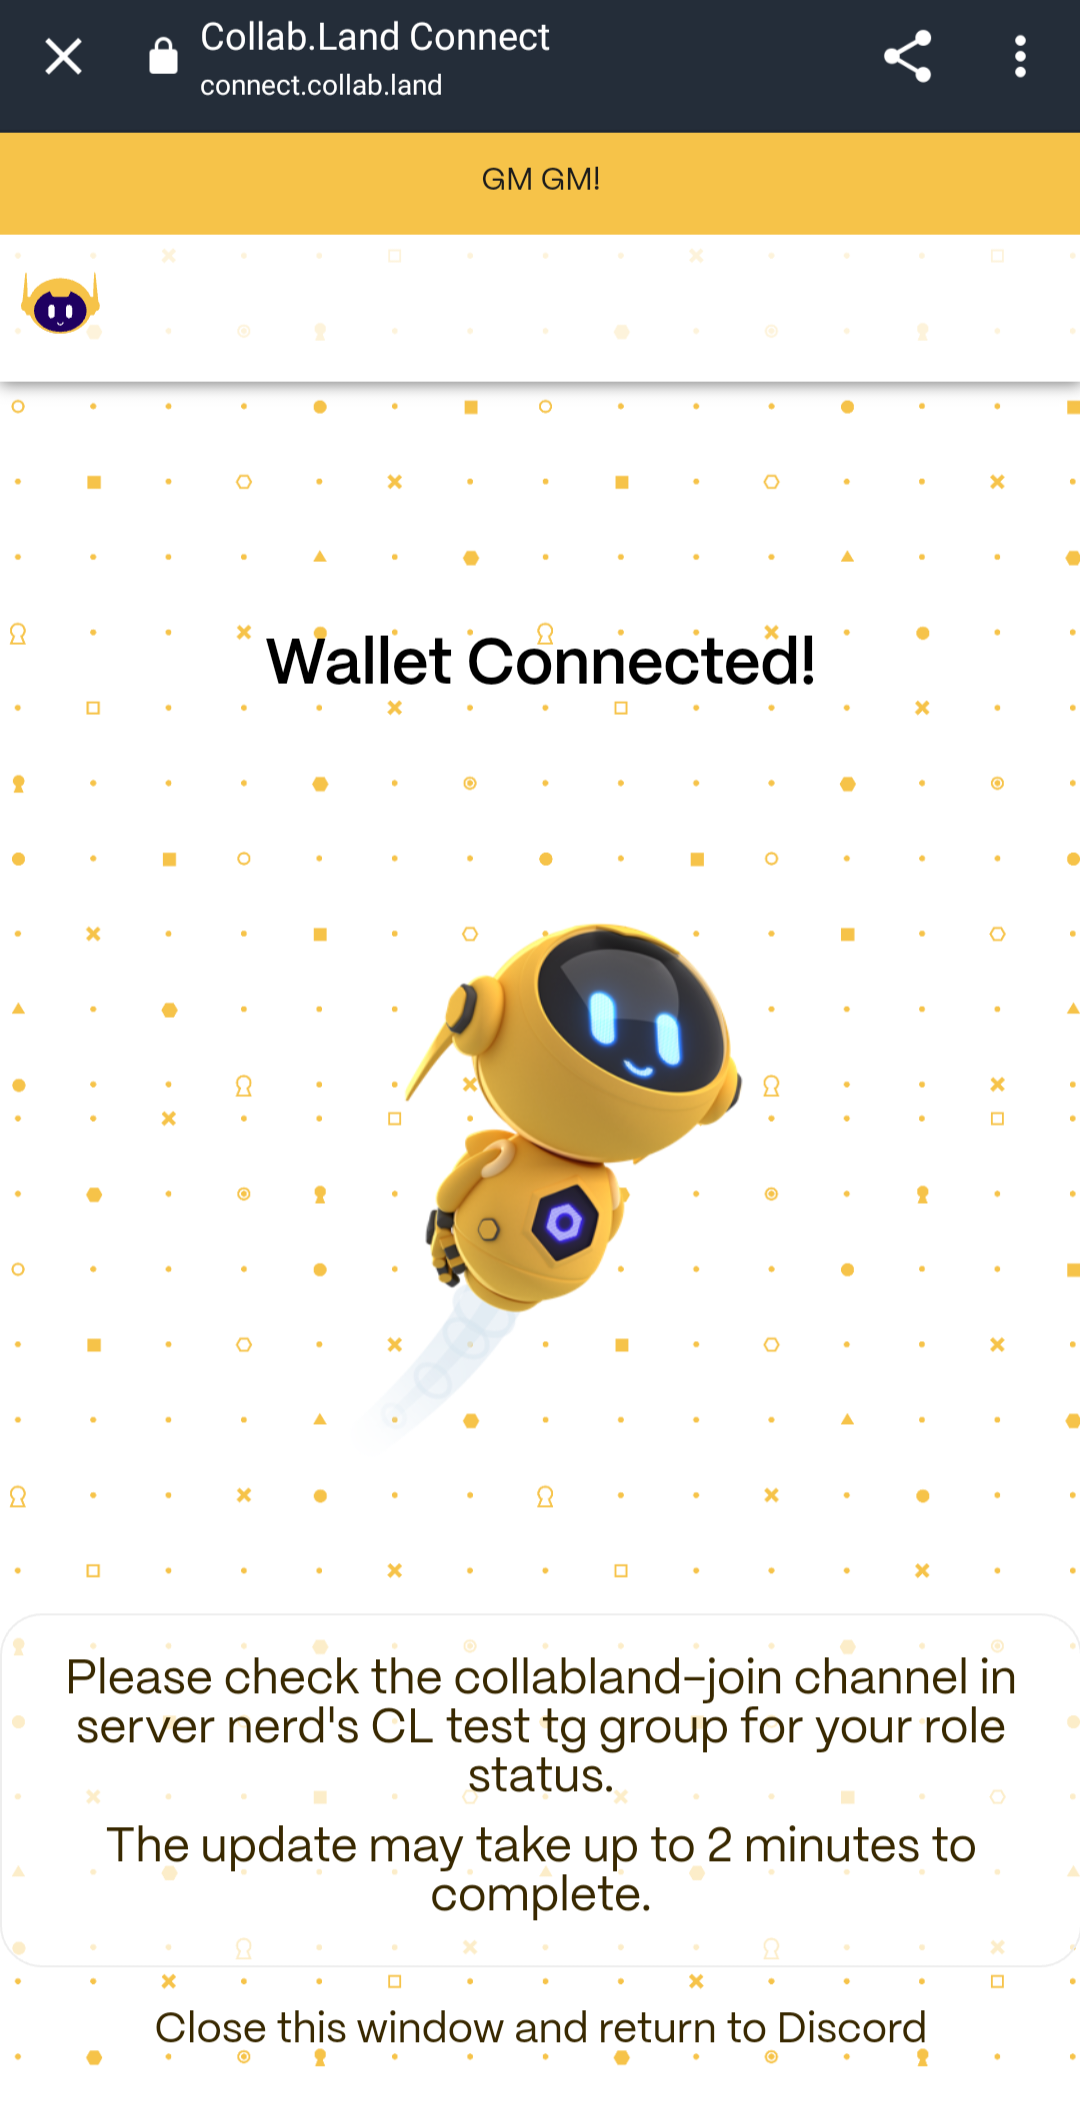 Wallet connected success image